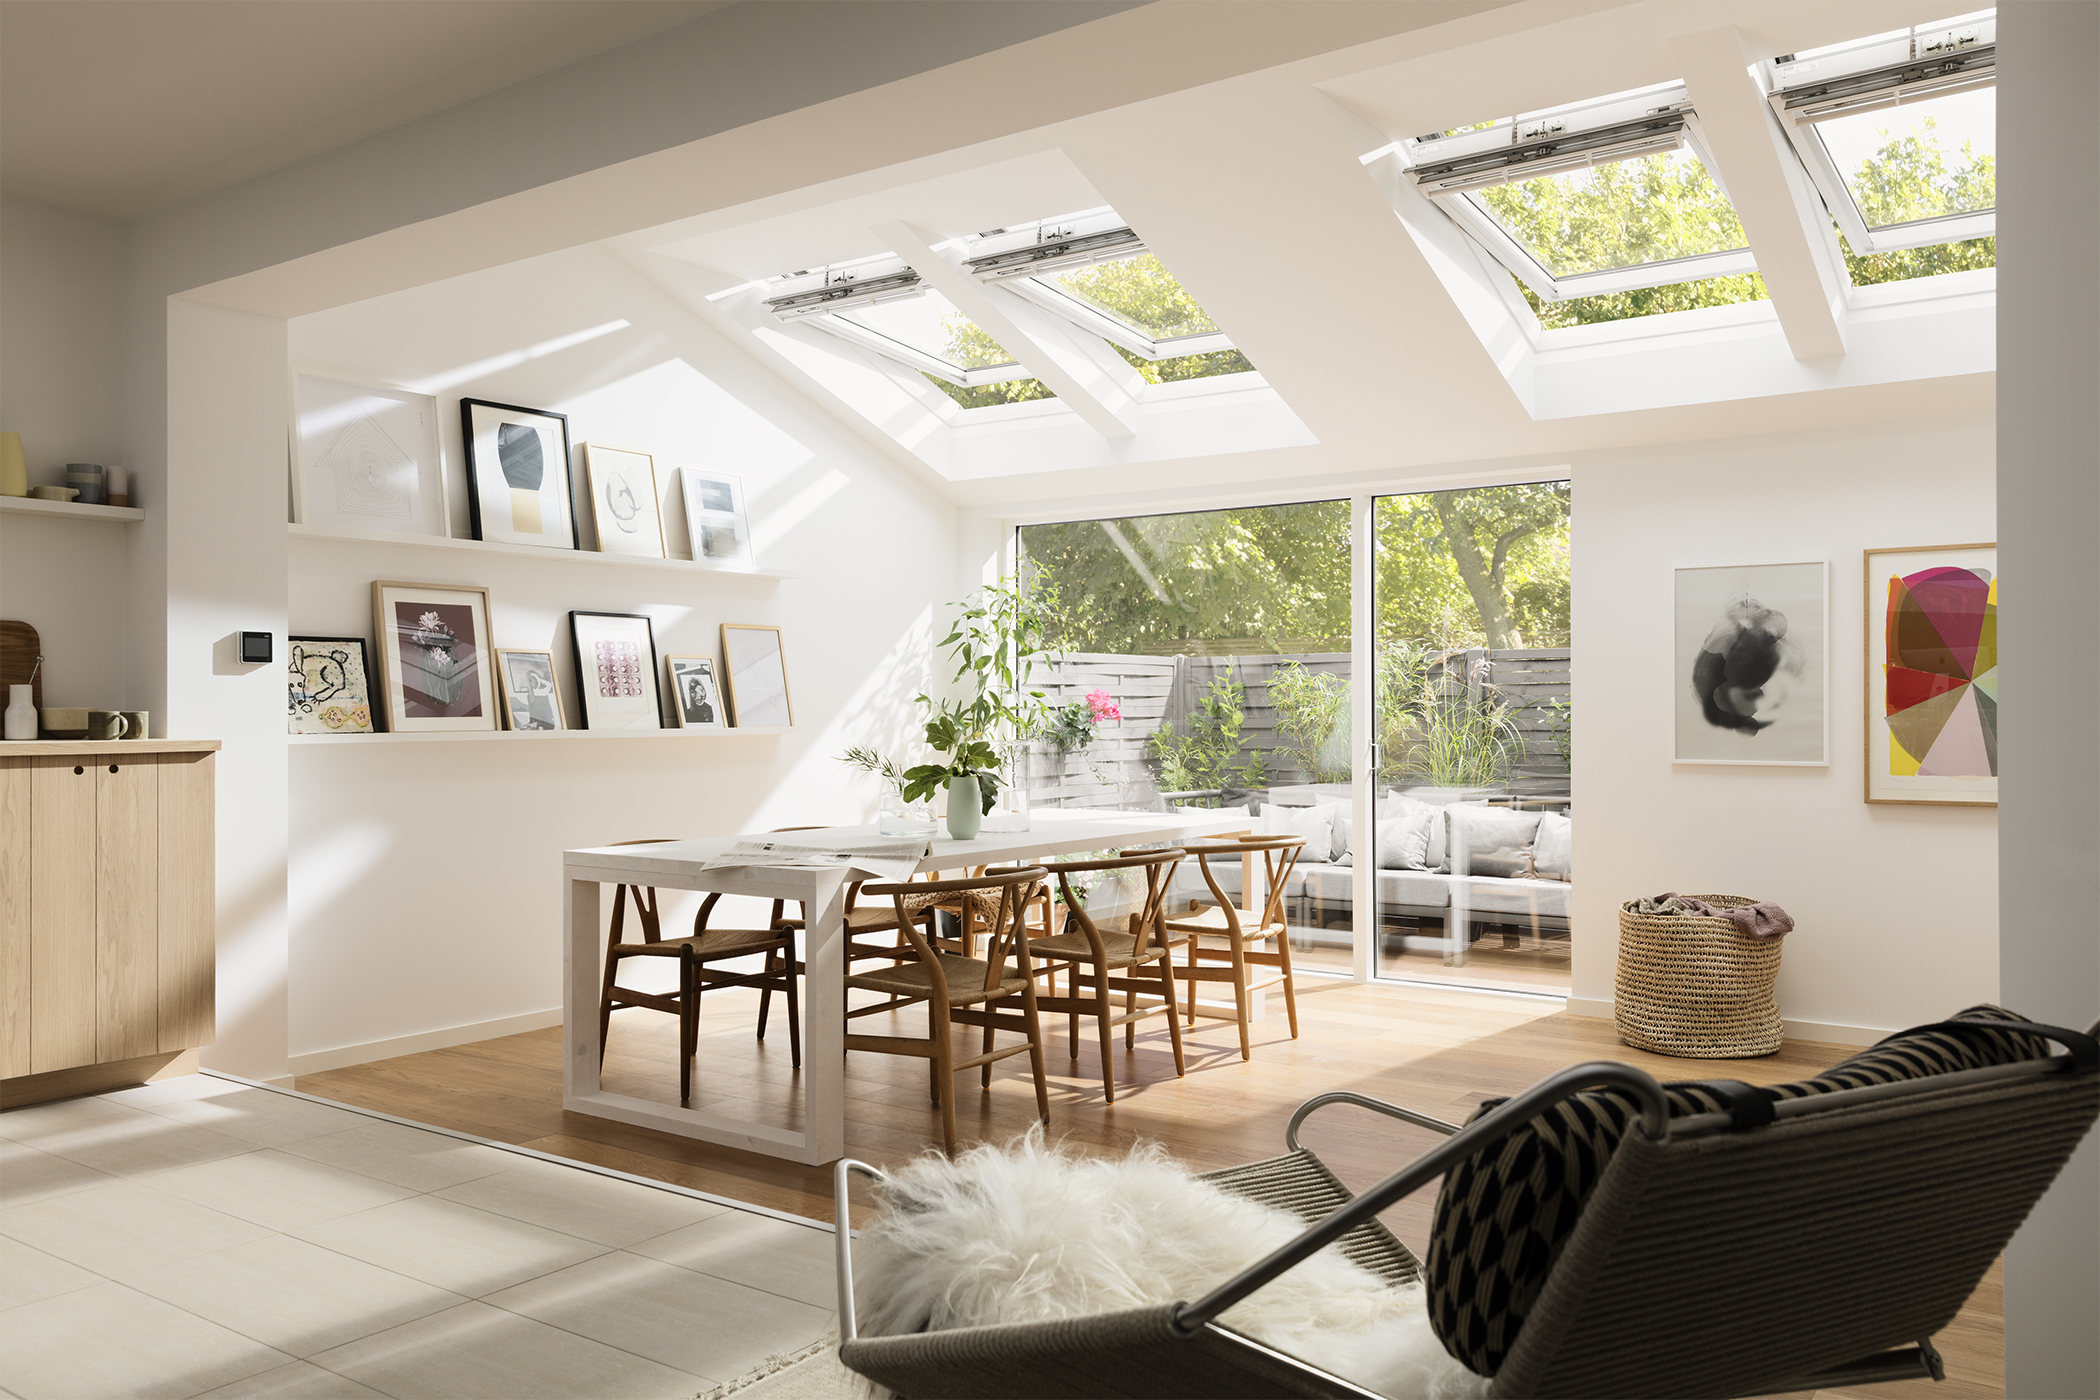 Create a bright, light and airy home with VELUX @VELUXGBI